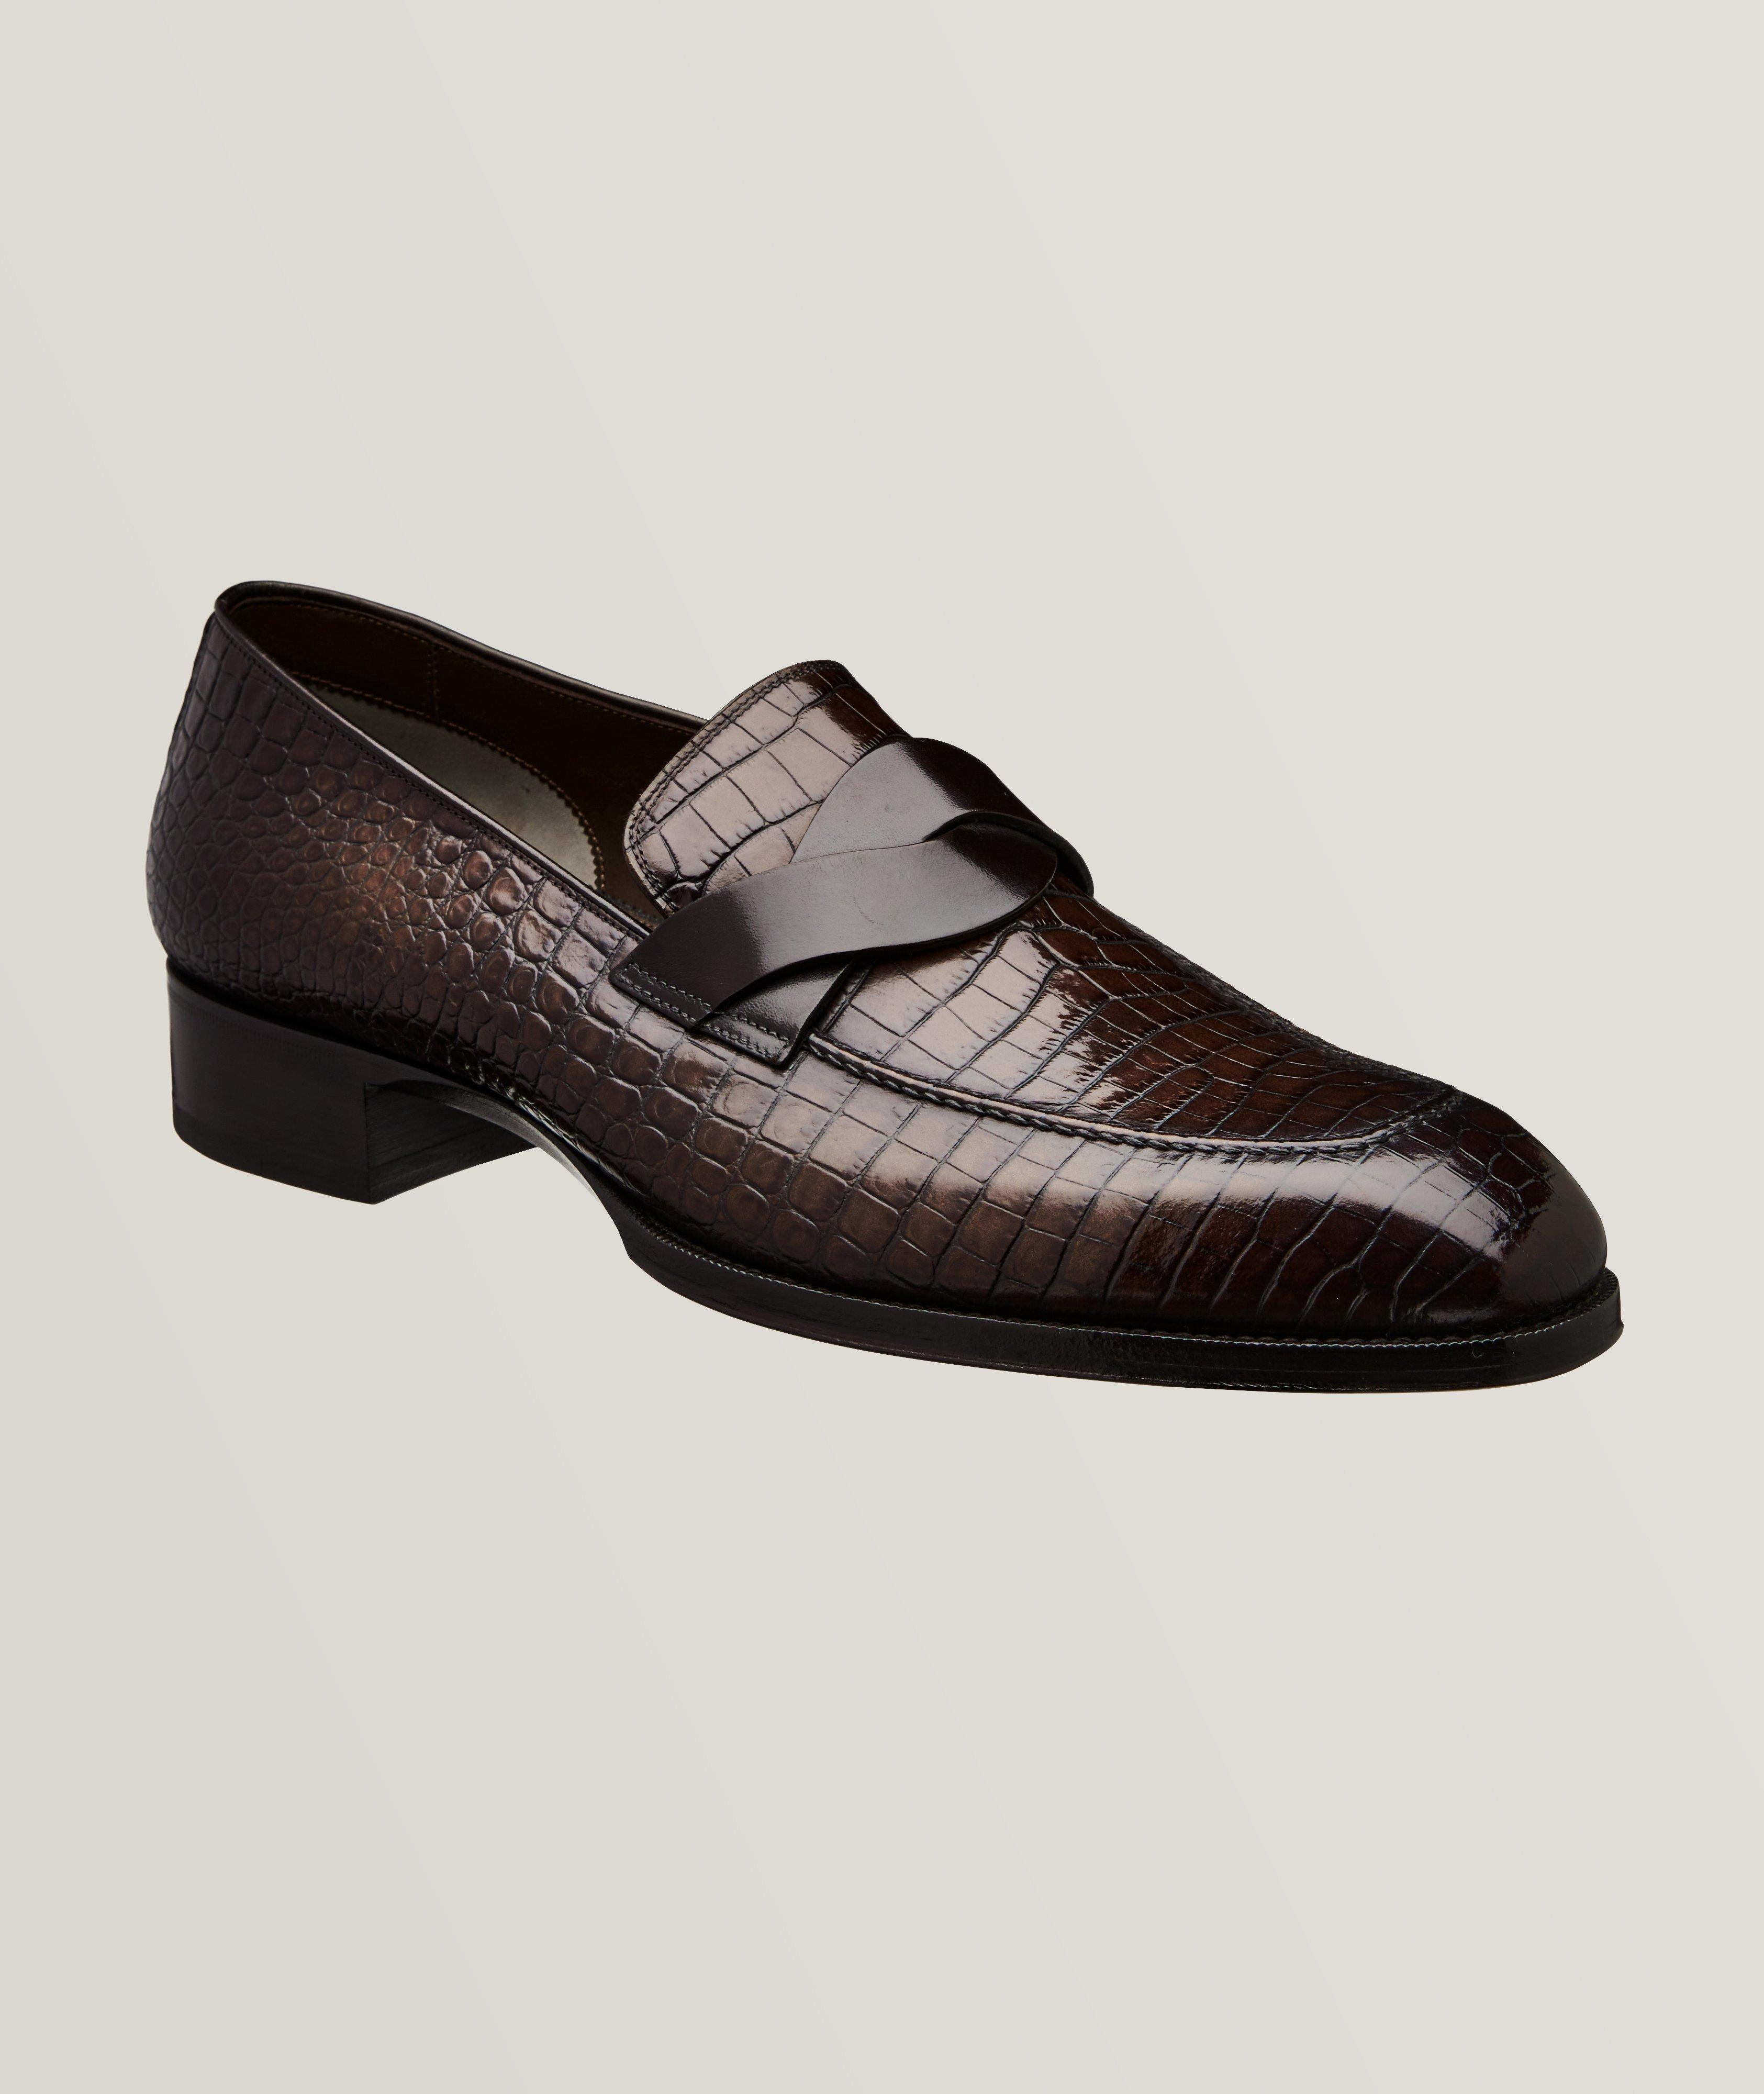 Elkan Twisted Band Alligator Embossed Leather Loafers image 0